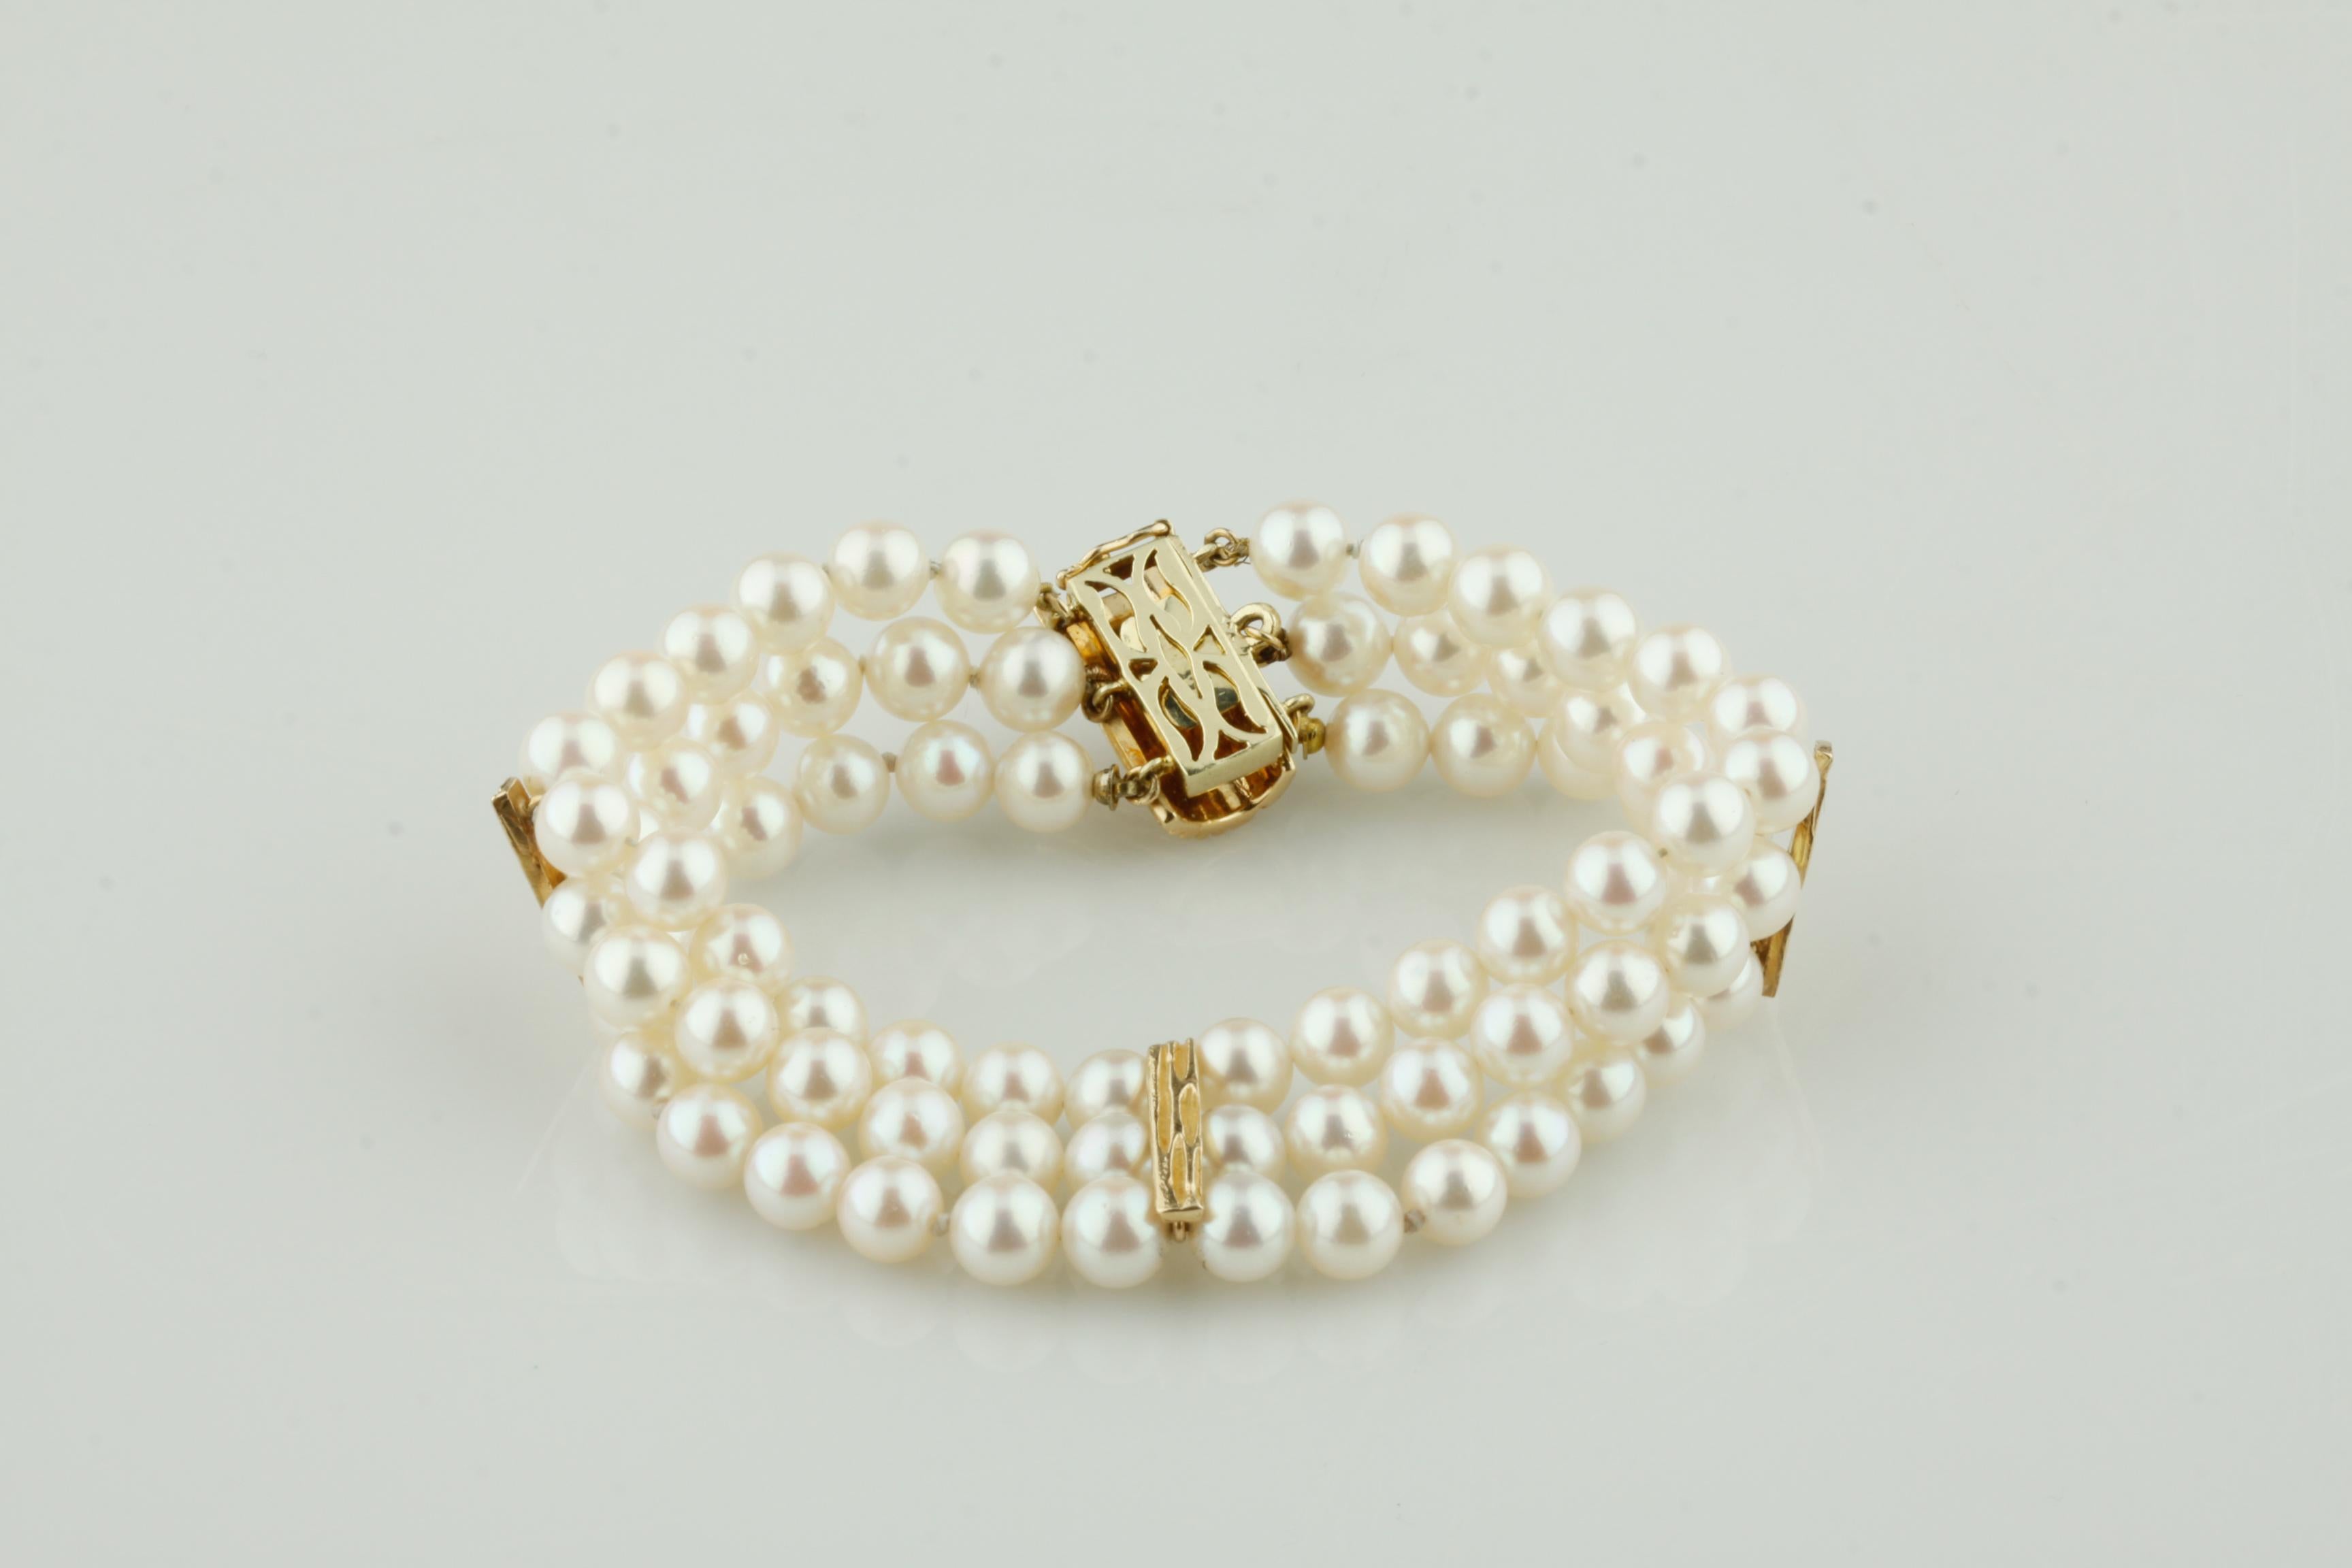 Gorgeous Pearl Bracelet 
Features Three Rows of Round Pearls
Pearls Appx 5 - 6 mm in Diameter
Nice Whitish, Pinkish, Mauvey Pearlescence
78 Pearls Total
Three 14k Yellow Gold Bar-Shaped Accents
14k Yellow Gold Clasp
Total Length = 7